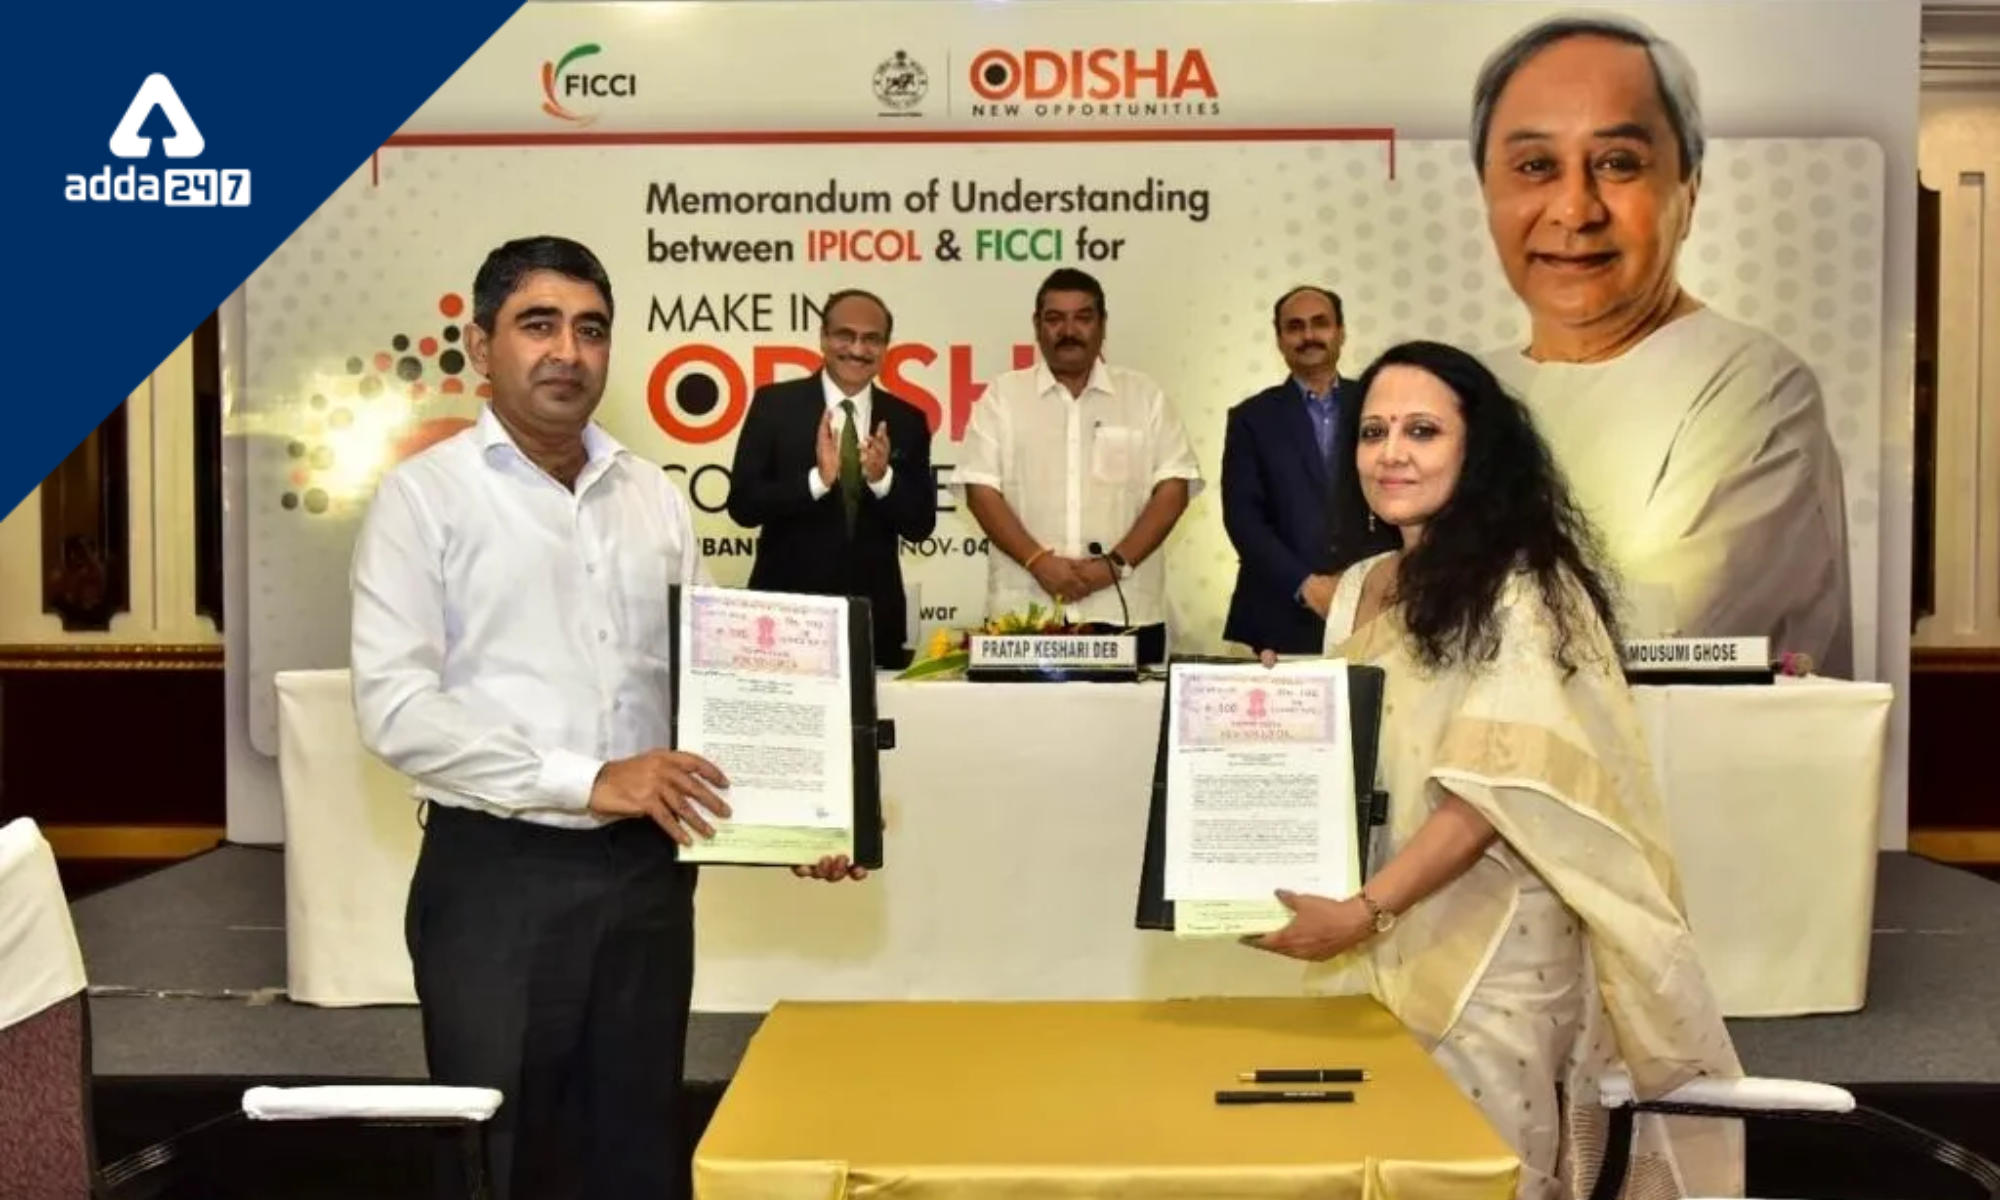 For next "Make in Odisha" summit in 2022, Odisha and FICCI ink an MoU_30.1